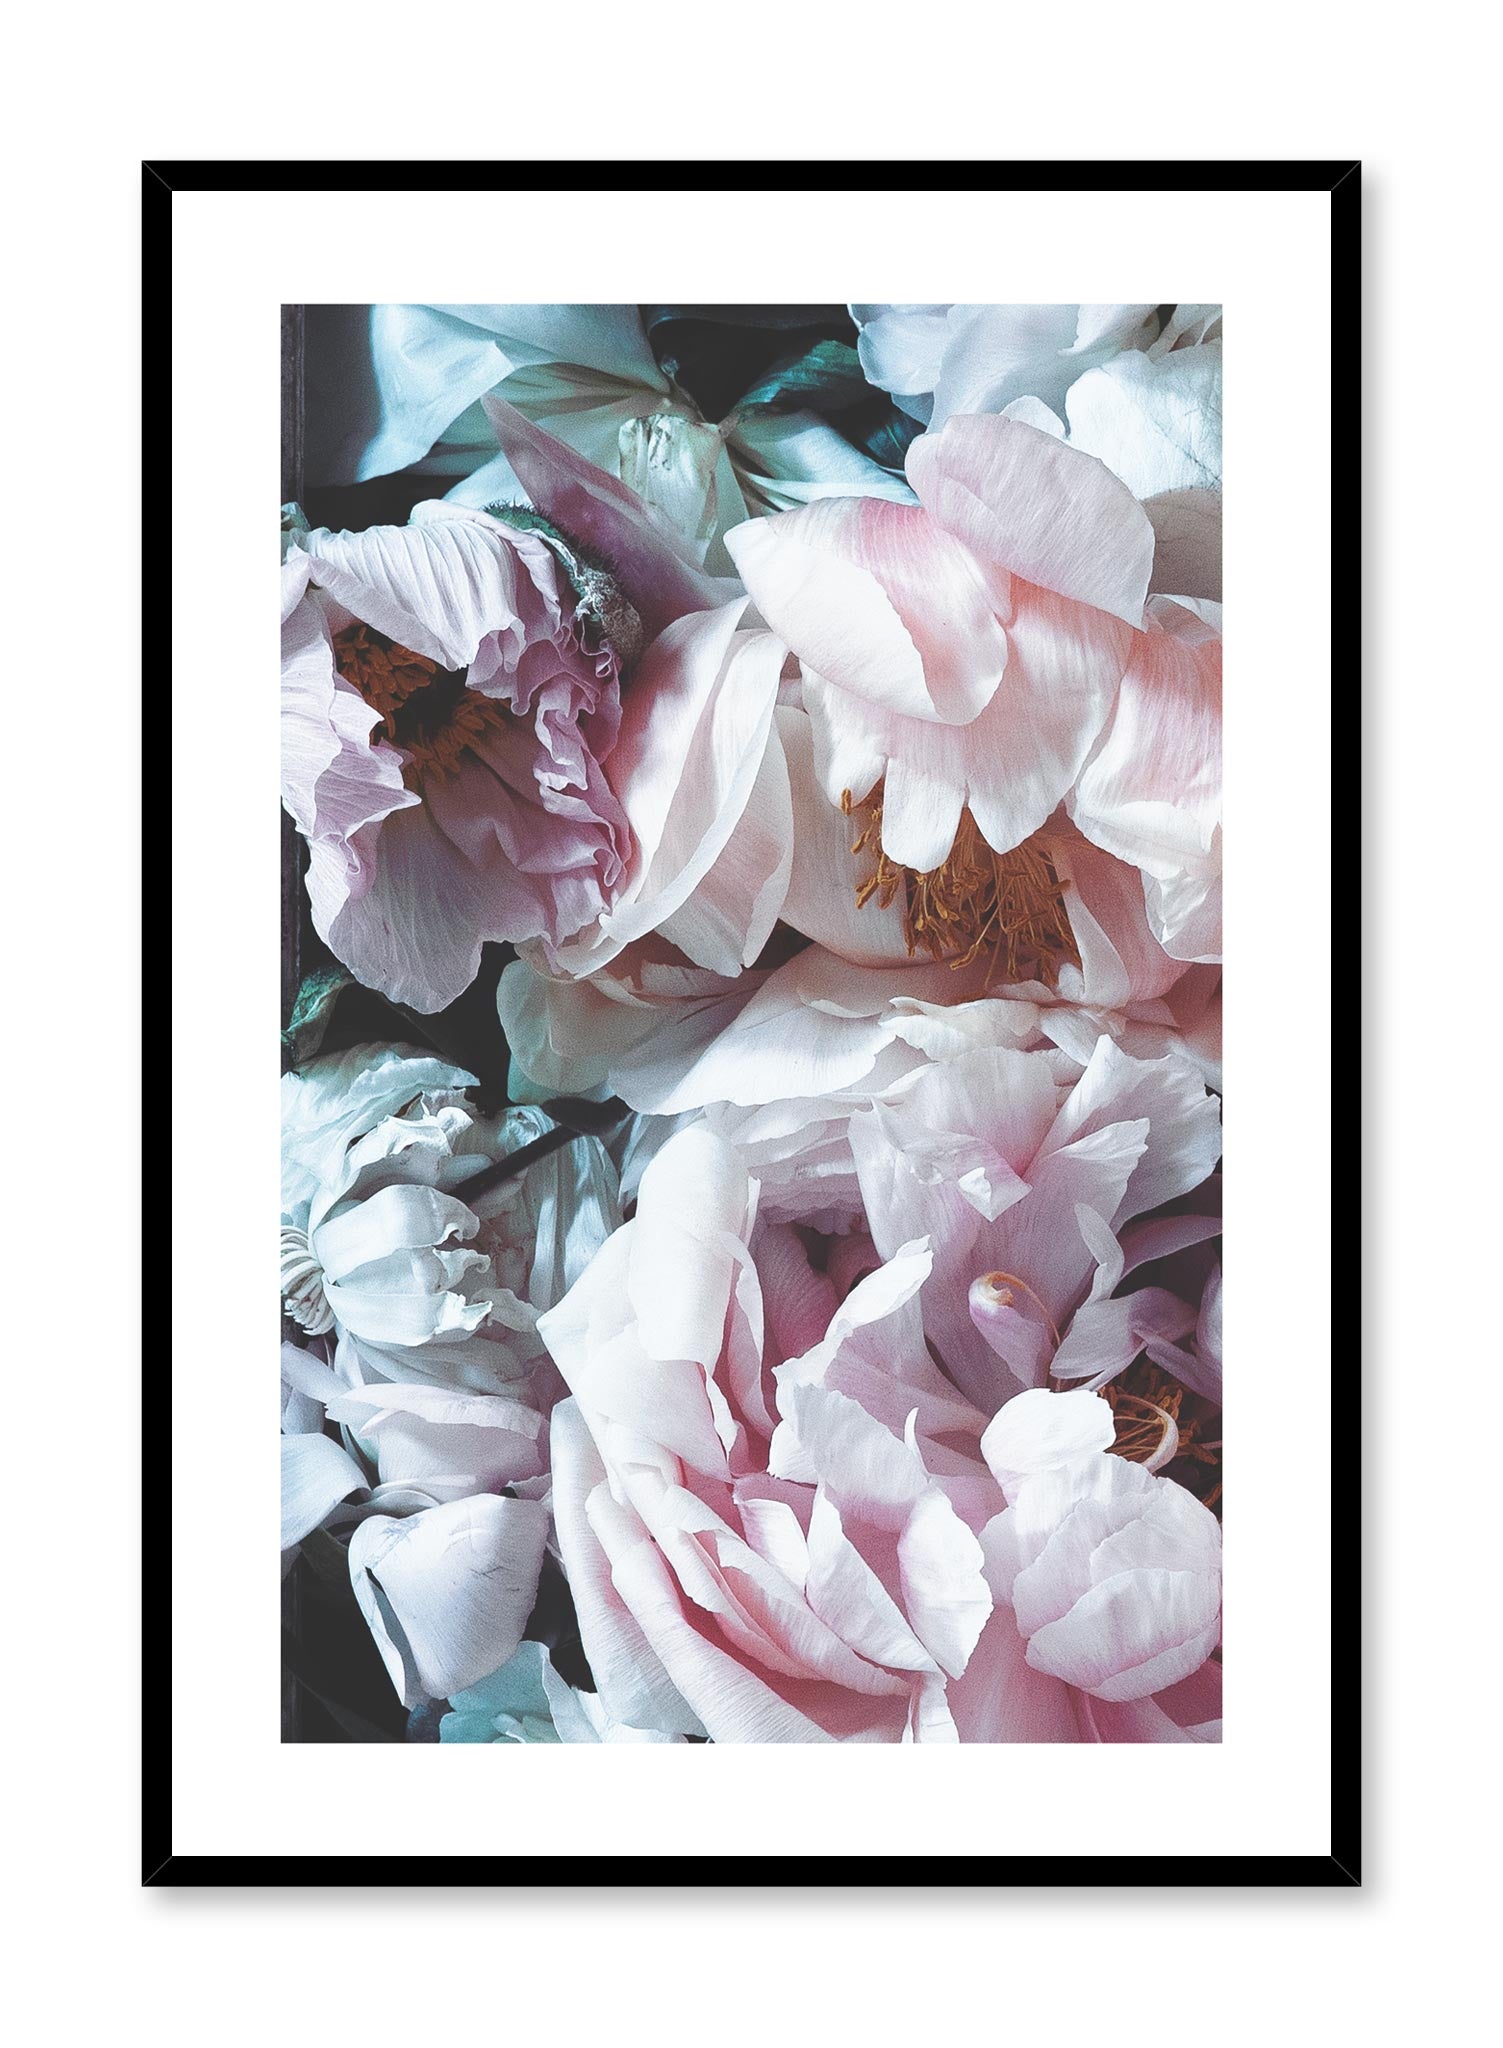 Minimalist design floral photography poster of Droopy Petals by Love Warriors Creative Studio - Buy at Opposite Wall